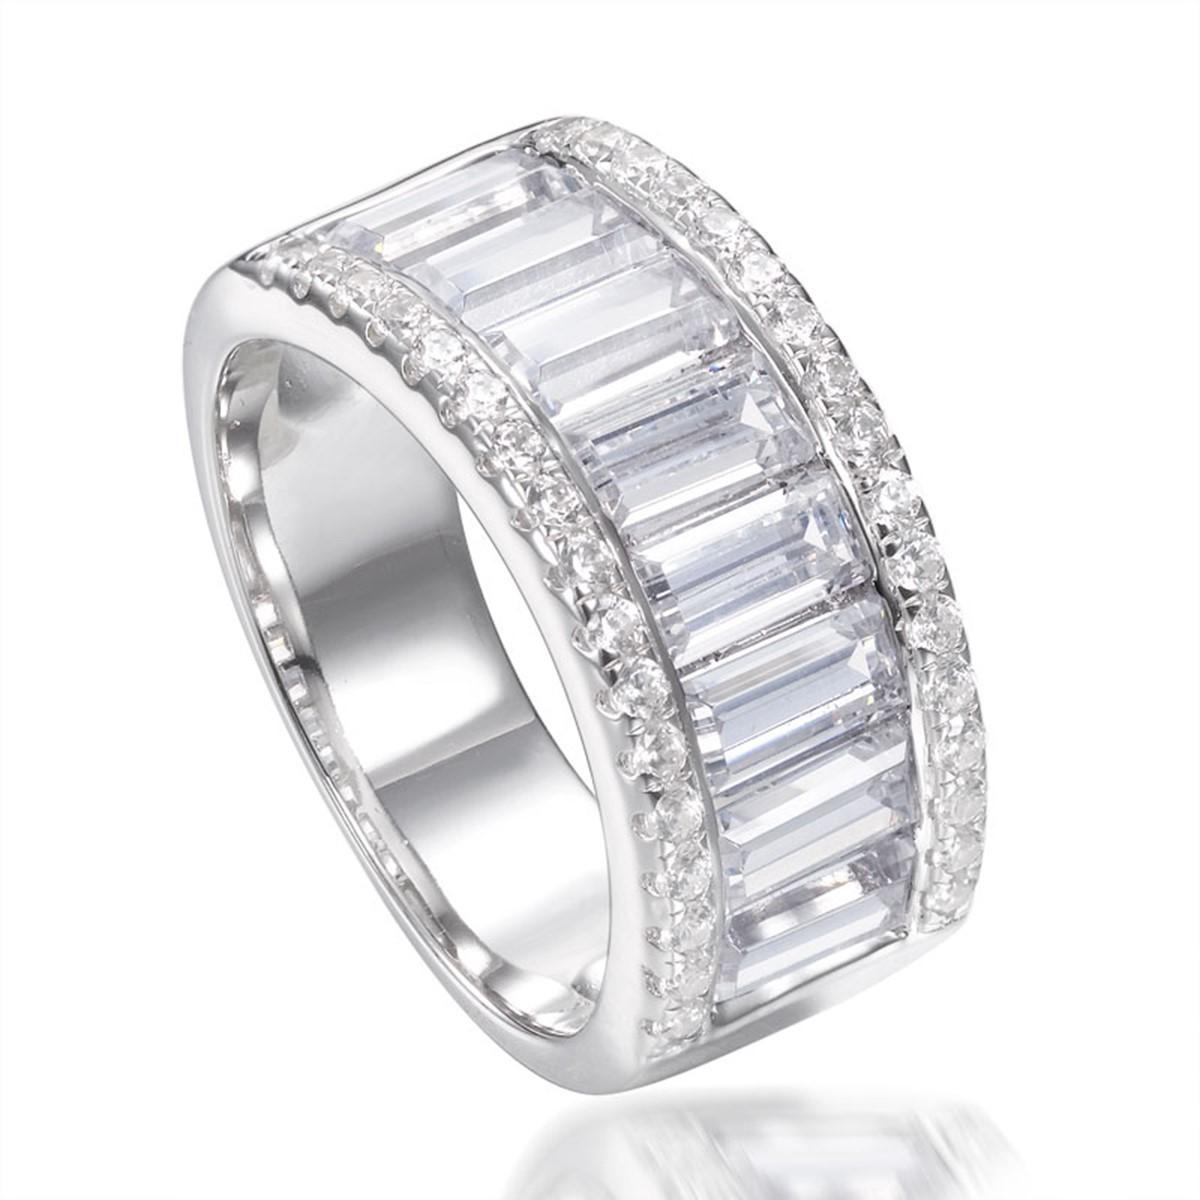 This exceptionally crafted channel set half eternity ring radiates brilliance. 

Centrally set with a row of 5.59 carat baguette cut cubic zirconia and accented by two rows of the highest quality brilliant cut cubics, this ring is a real